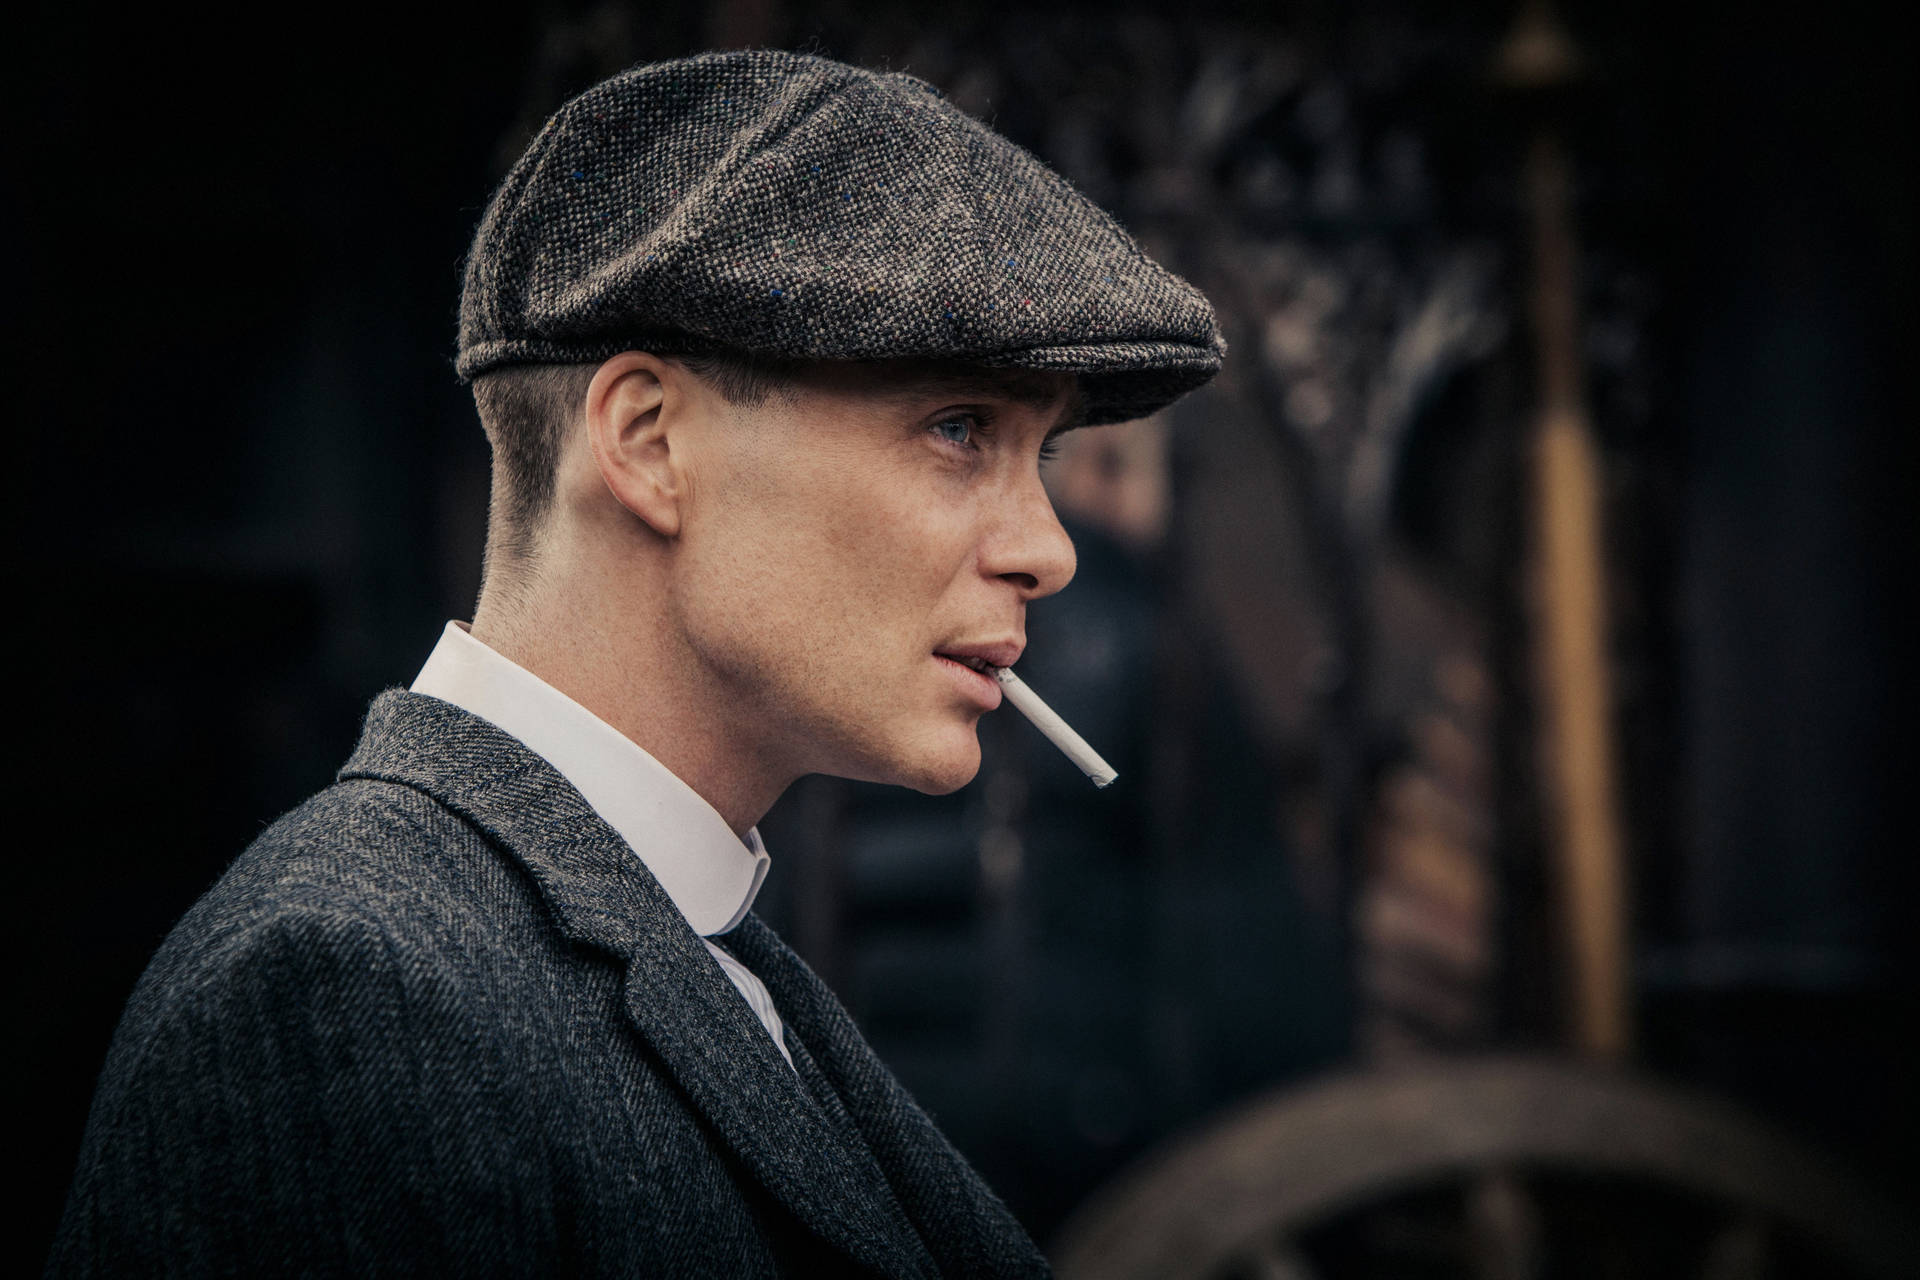 What is Thomas Shelby's real name?